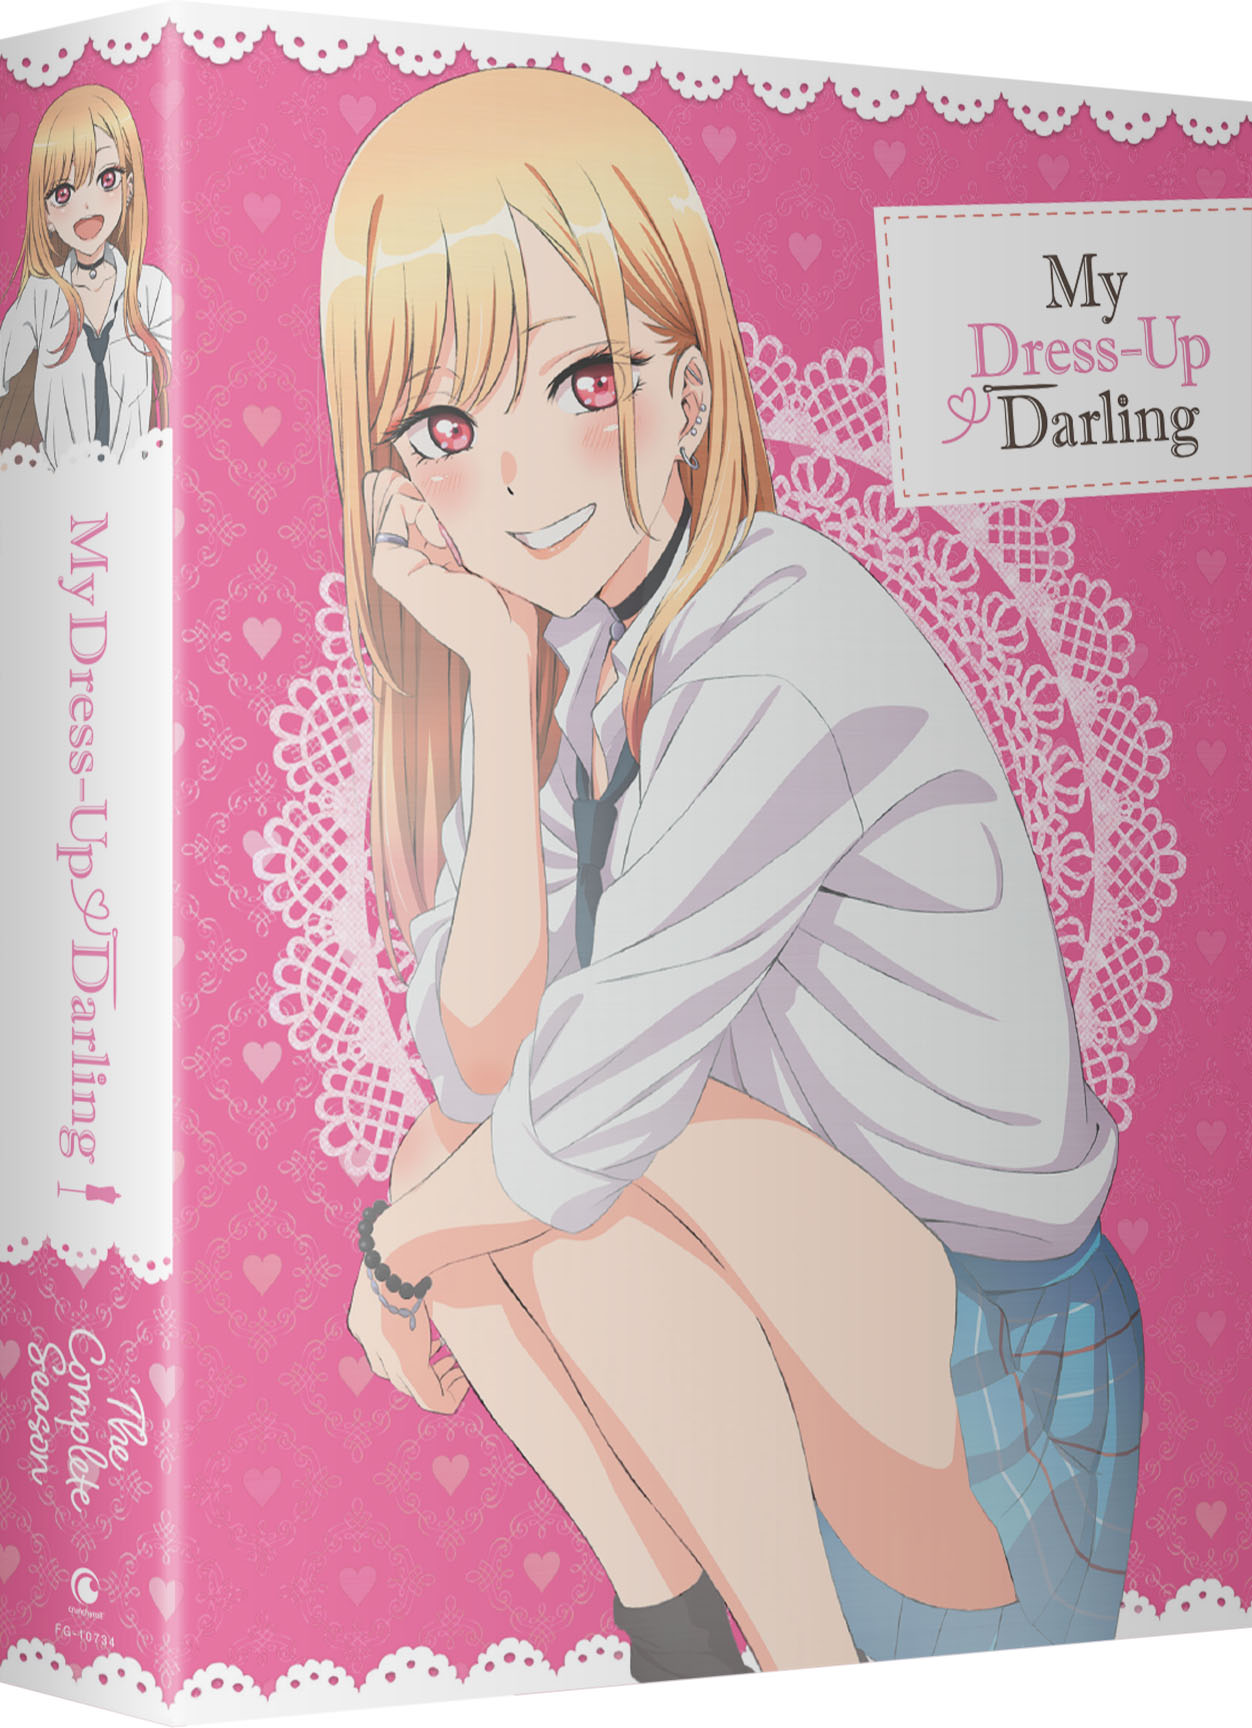 My Dress Up Darling - The Complete Season - Blu-ray + DVD - Limited Edition image count 3